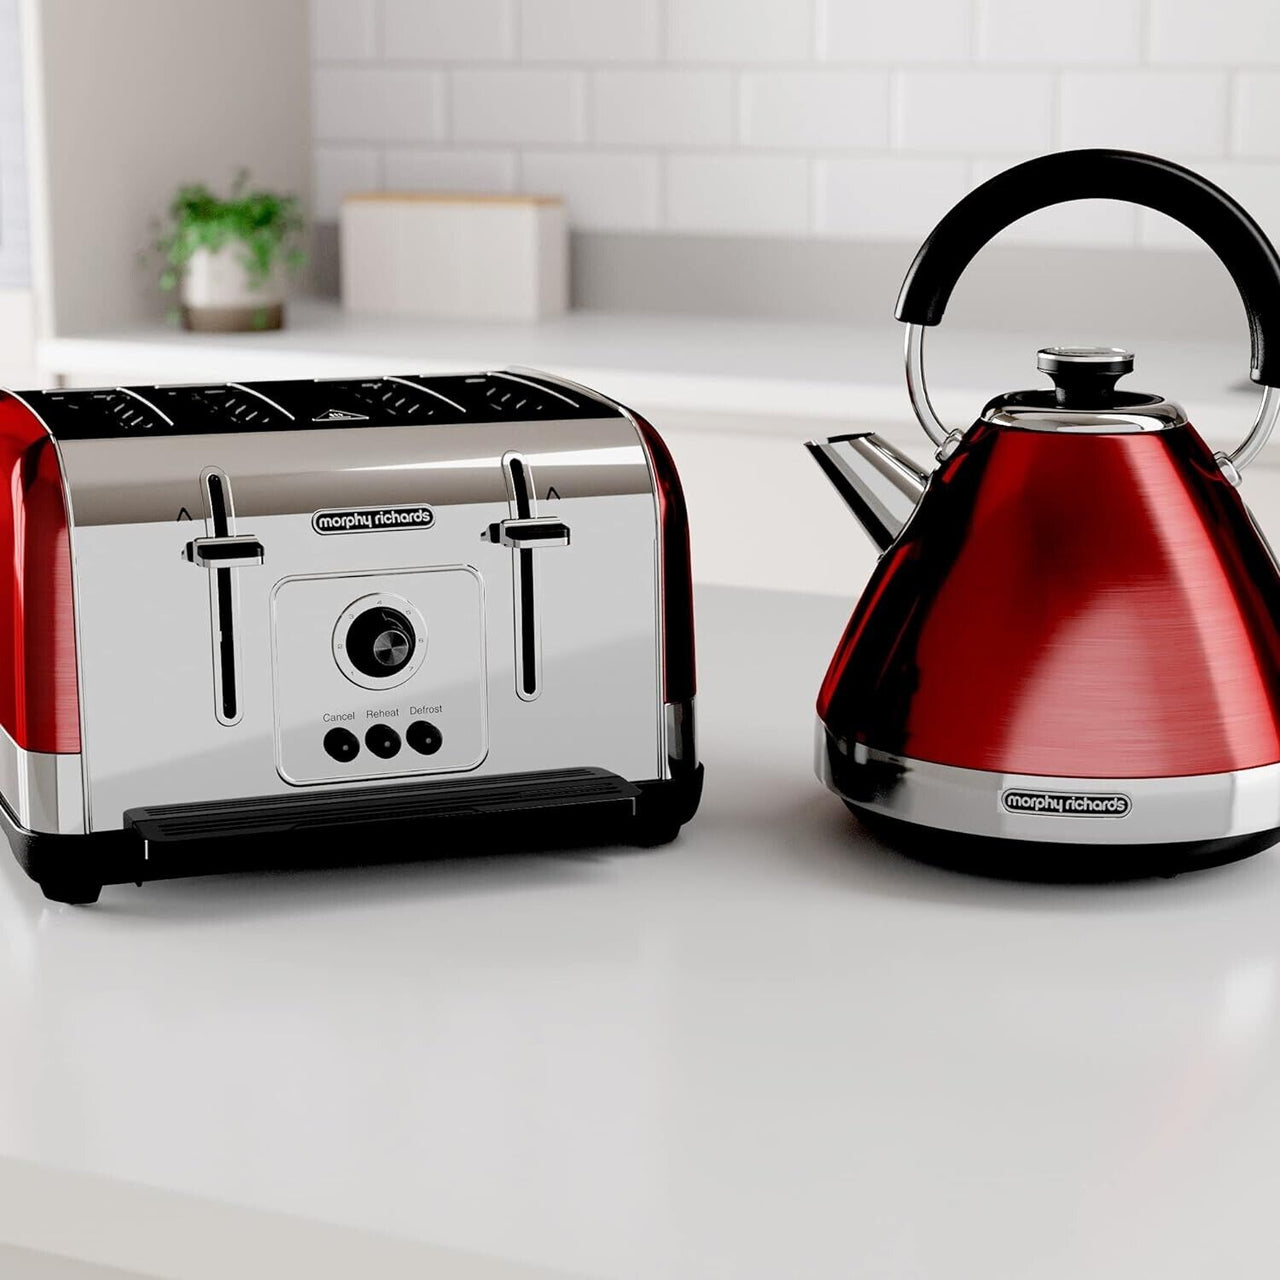 Morphy Richards Venture Red Pyramid Kettle & 4 Slice Toaster Matching Set